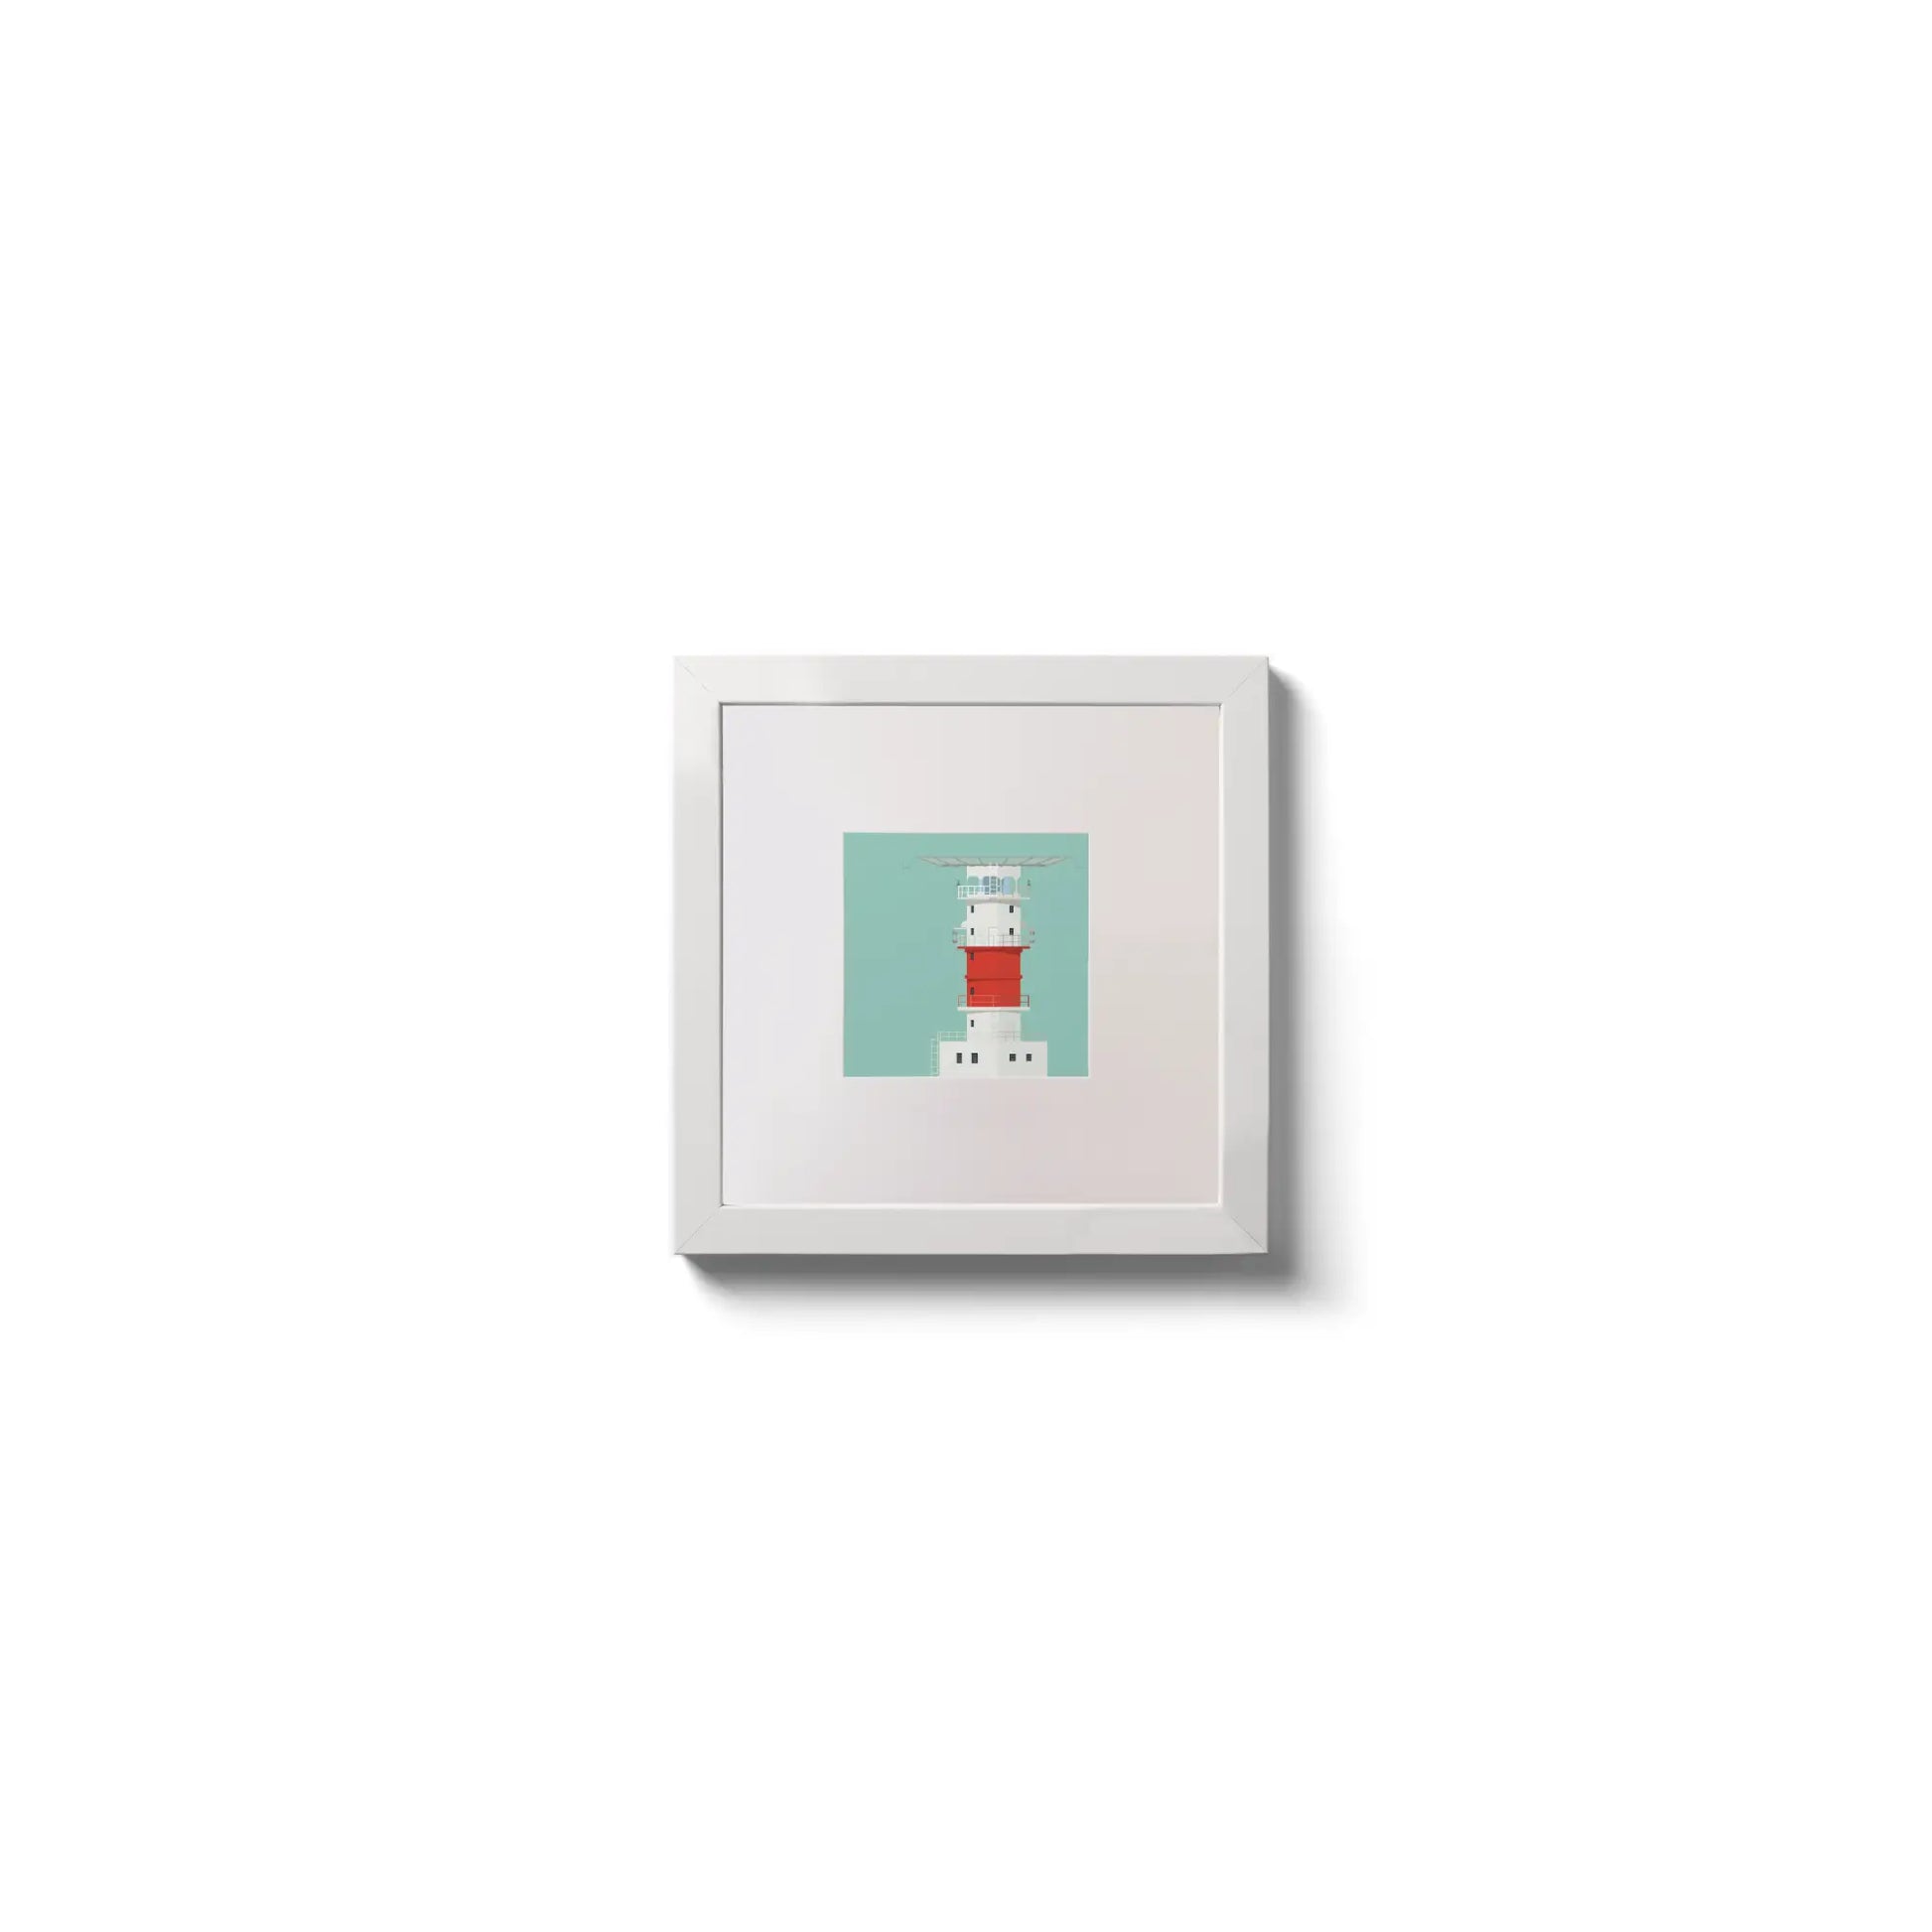 Illustration of Kish lighthouse on an ocean green background,  in a white square frame measuring 10x10cm.